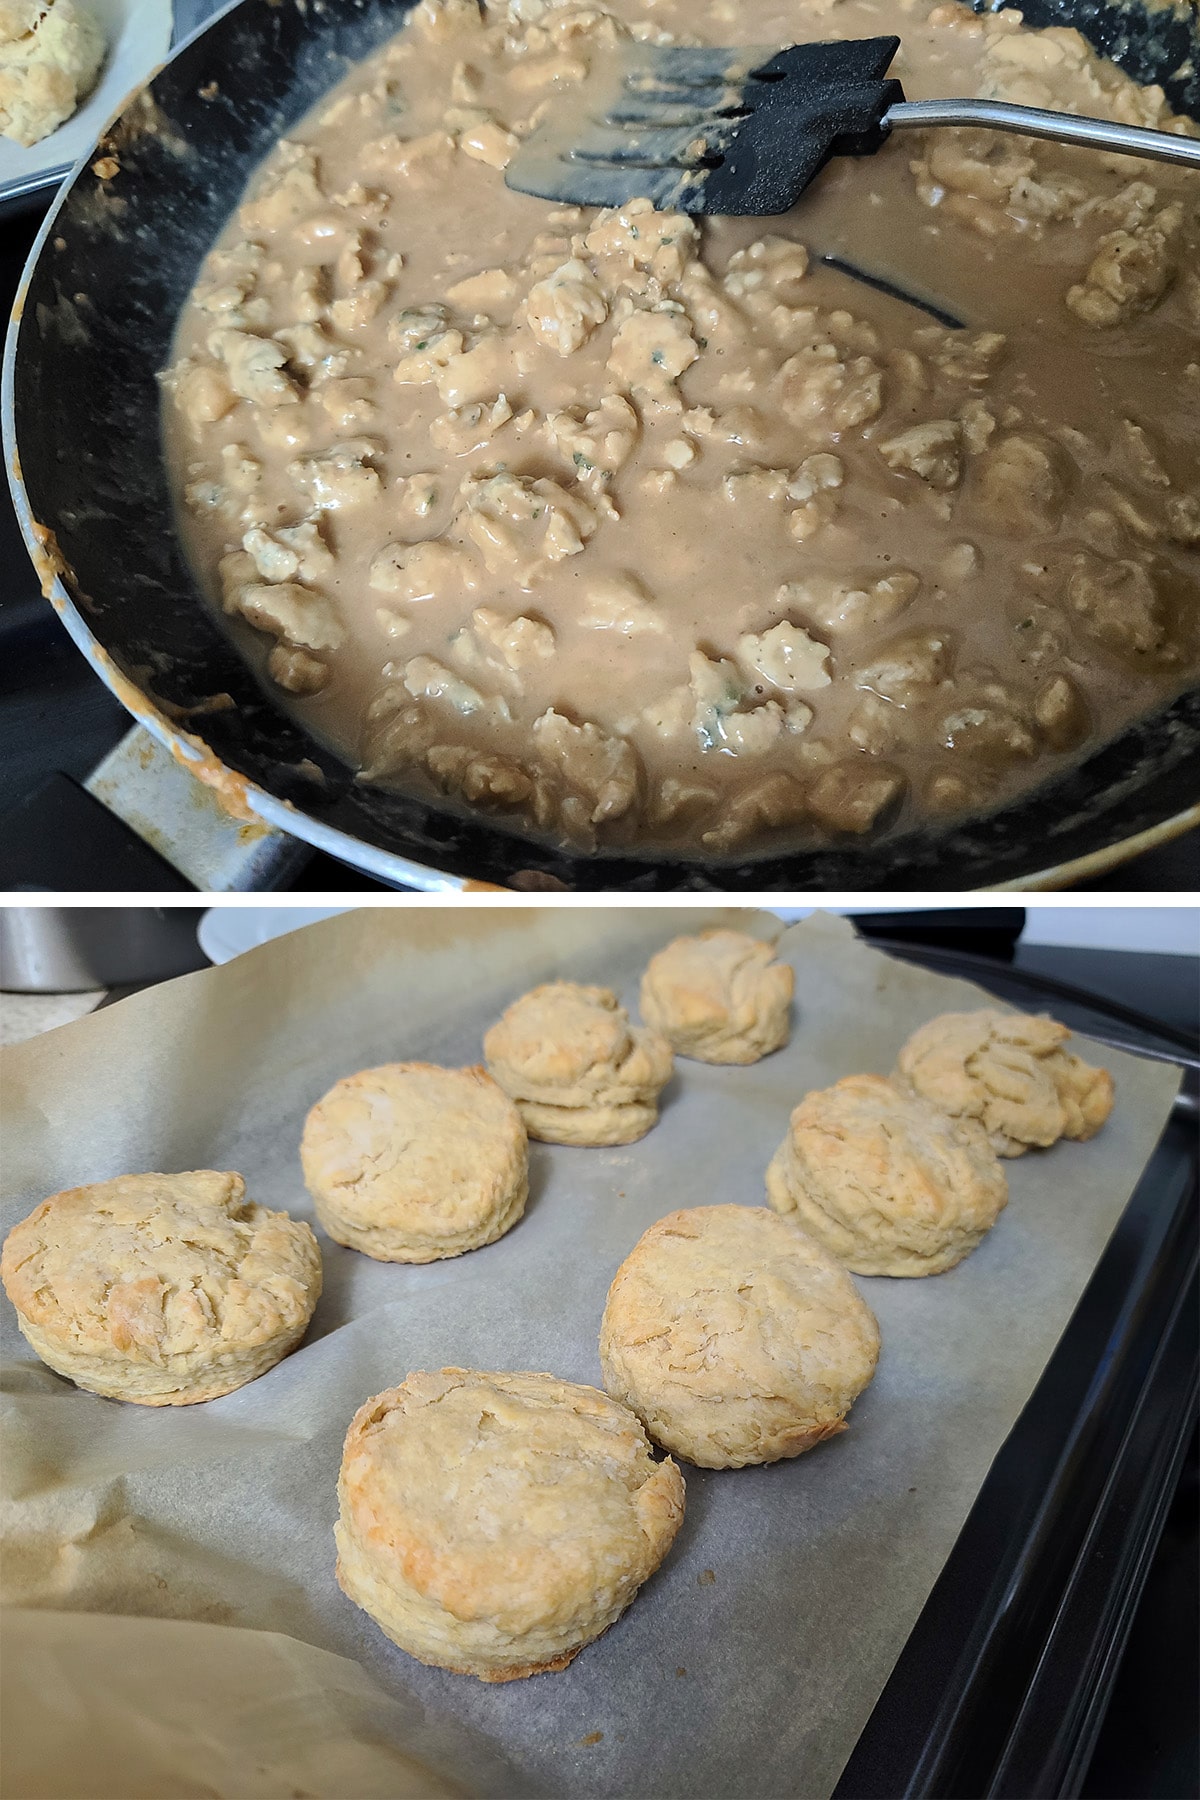 A 2 part image showing a pan of sausage gravy, and a pan of fresh baked biscuits.